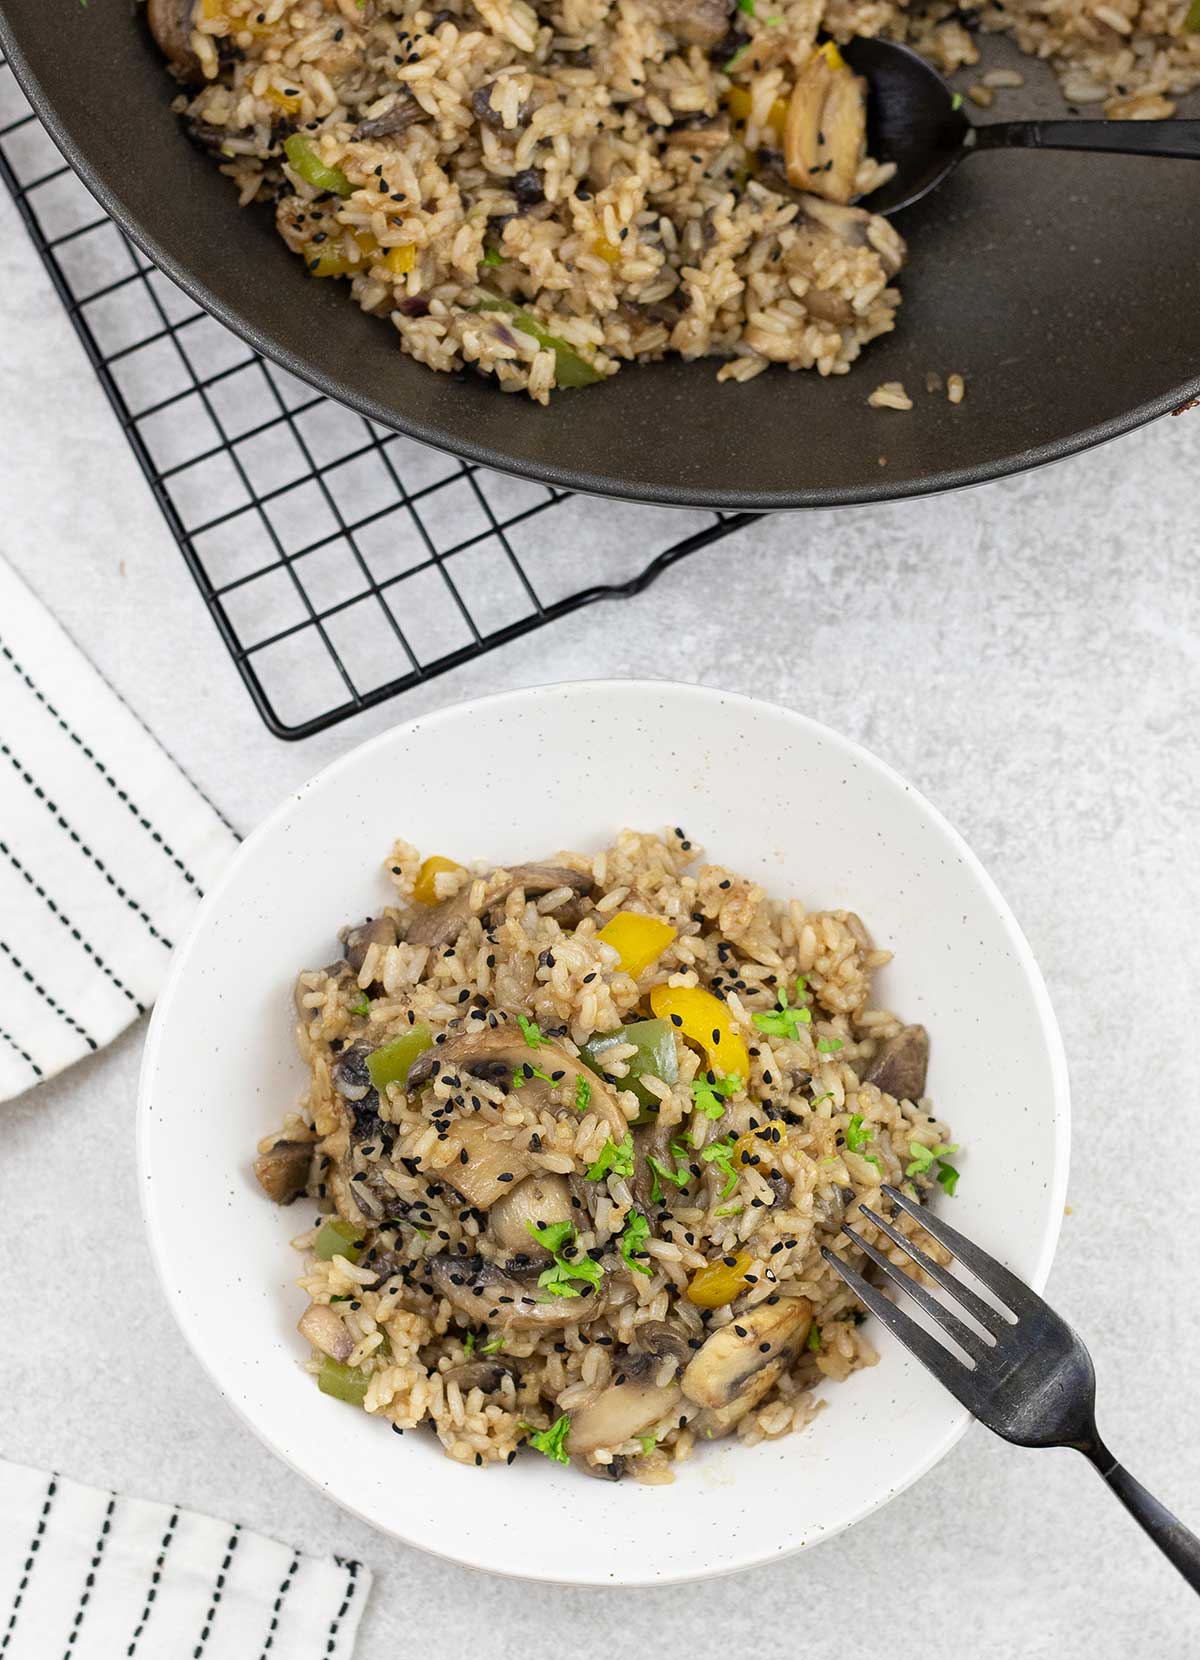 A plate full of mushroom fried rice and a pan in the background.